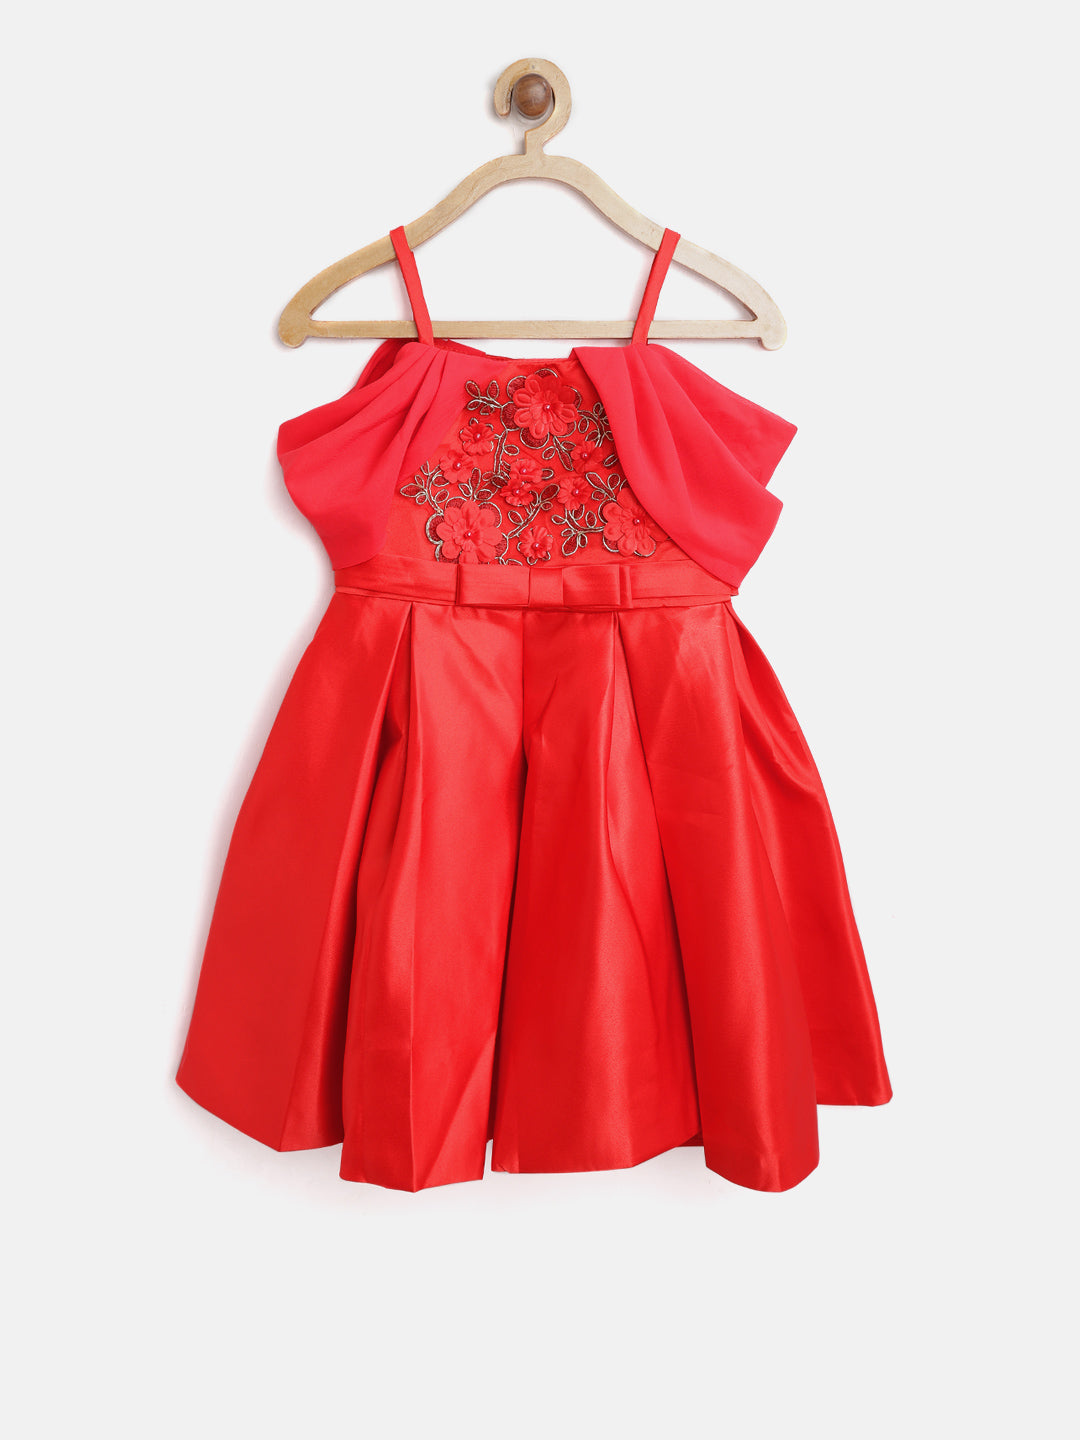 Girls Red Pleated and embellished Party Dress with beautiful back Bow